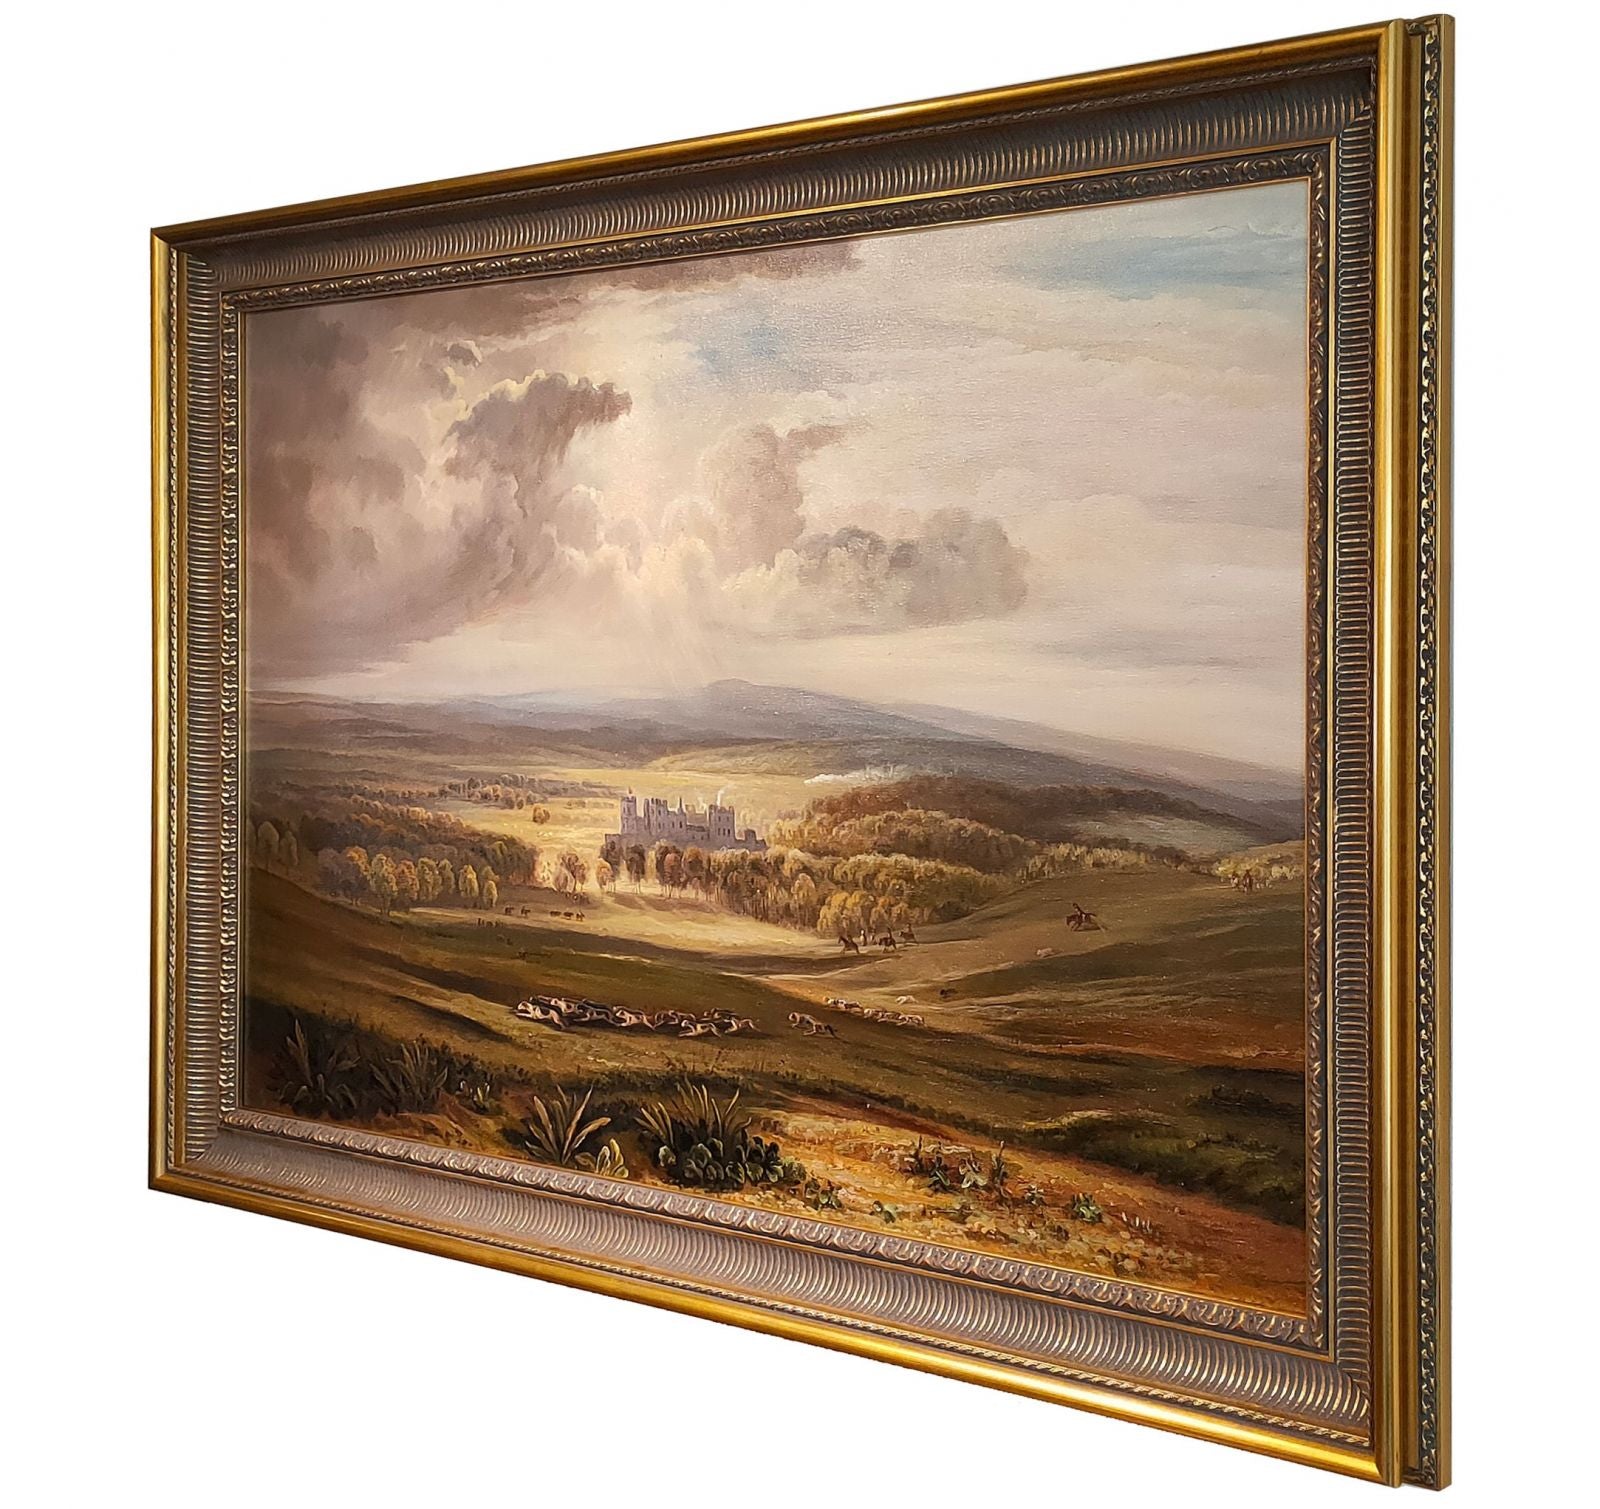 Oil painting after 'Raby Castle, the Seat of the Earl of Darlington' in style of JMW Turner